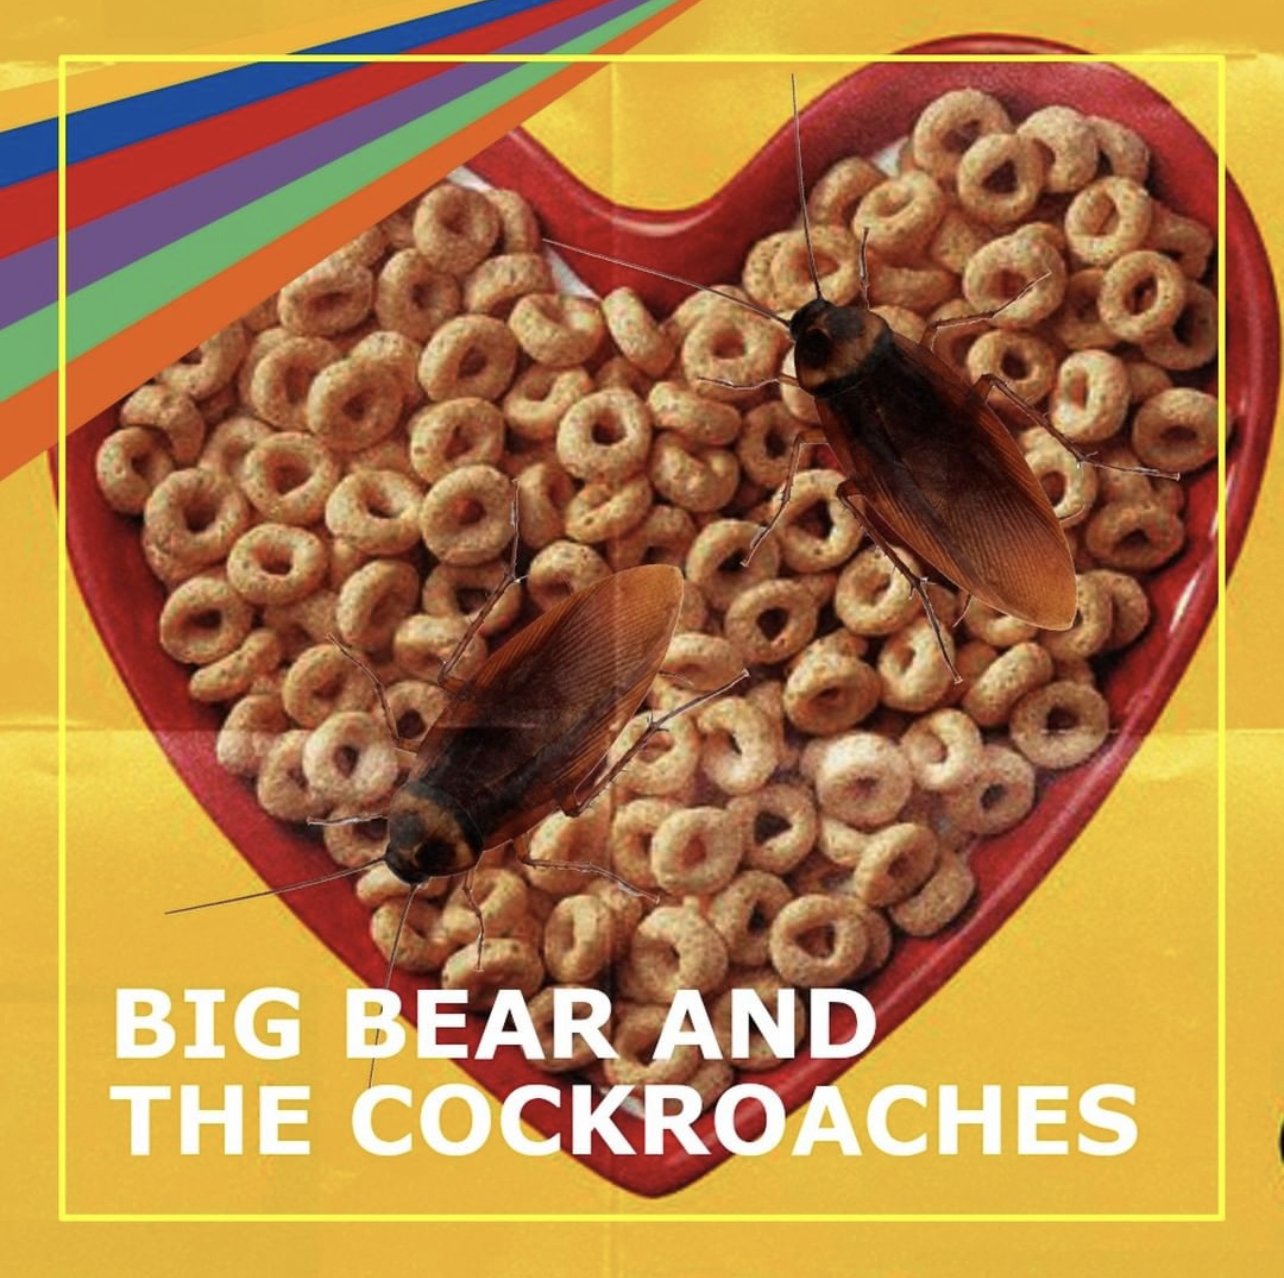 Big Bear and the Cockroaches